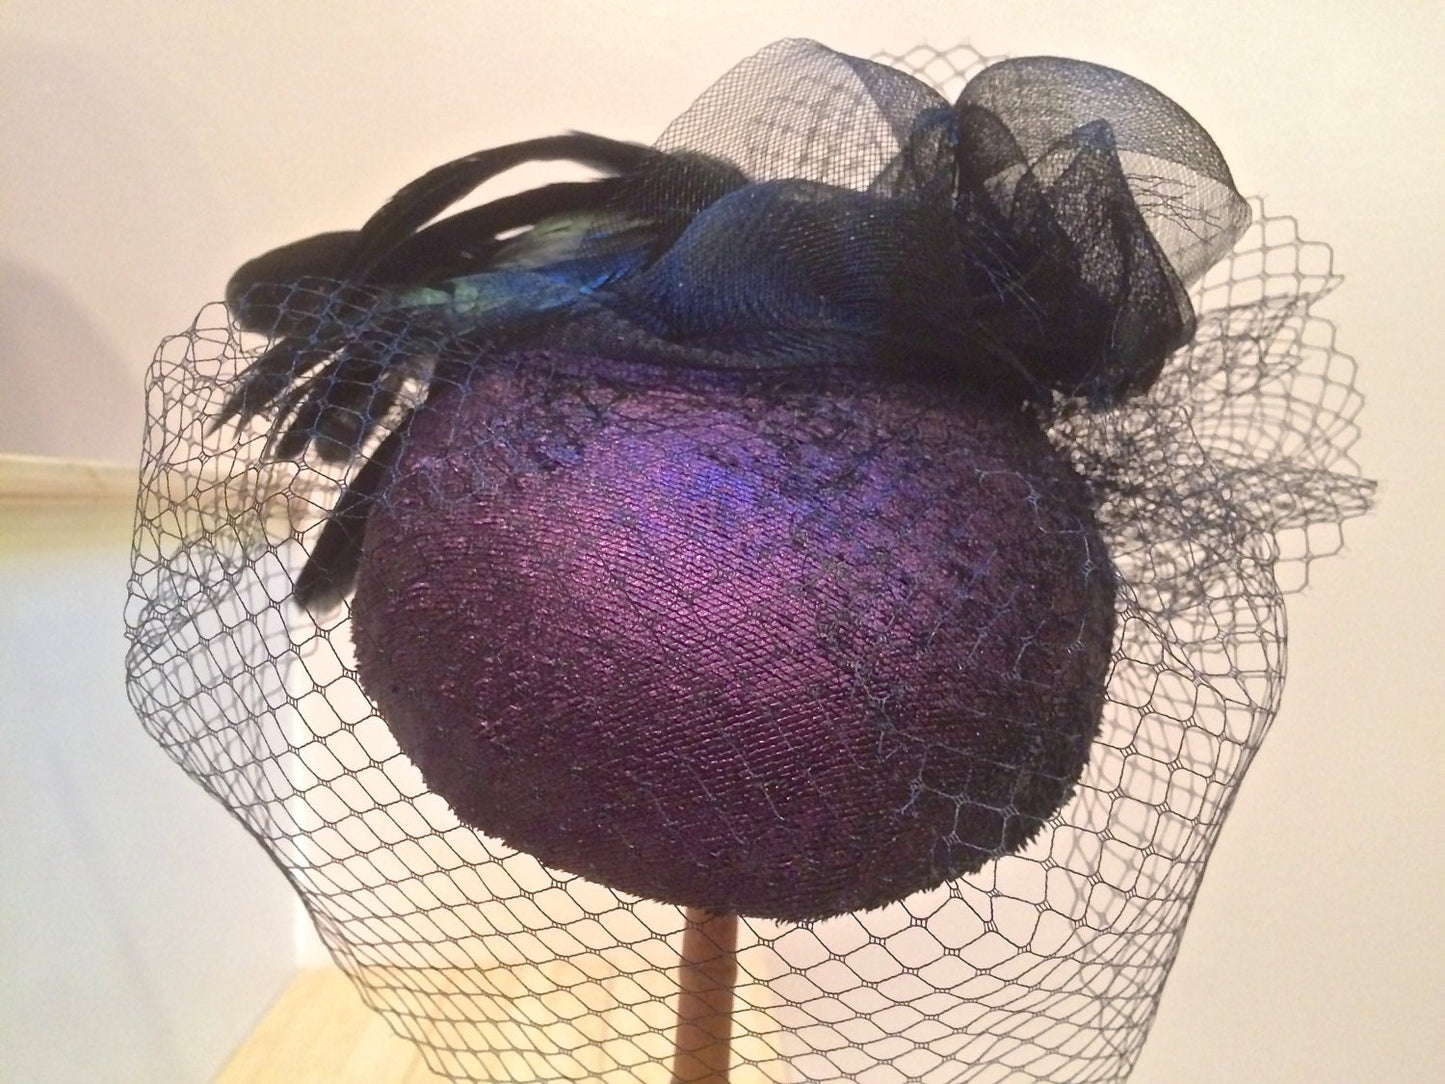 Aubergine Iridescent Leather pillbox. Perfect Ascot Derby Race Day. Hat with black crinoline, Black veiling and iridescent rooster feathers.